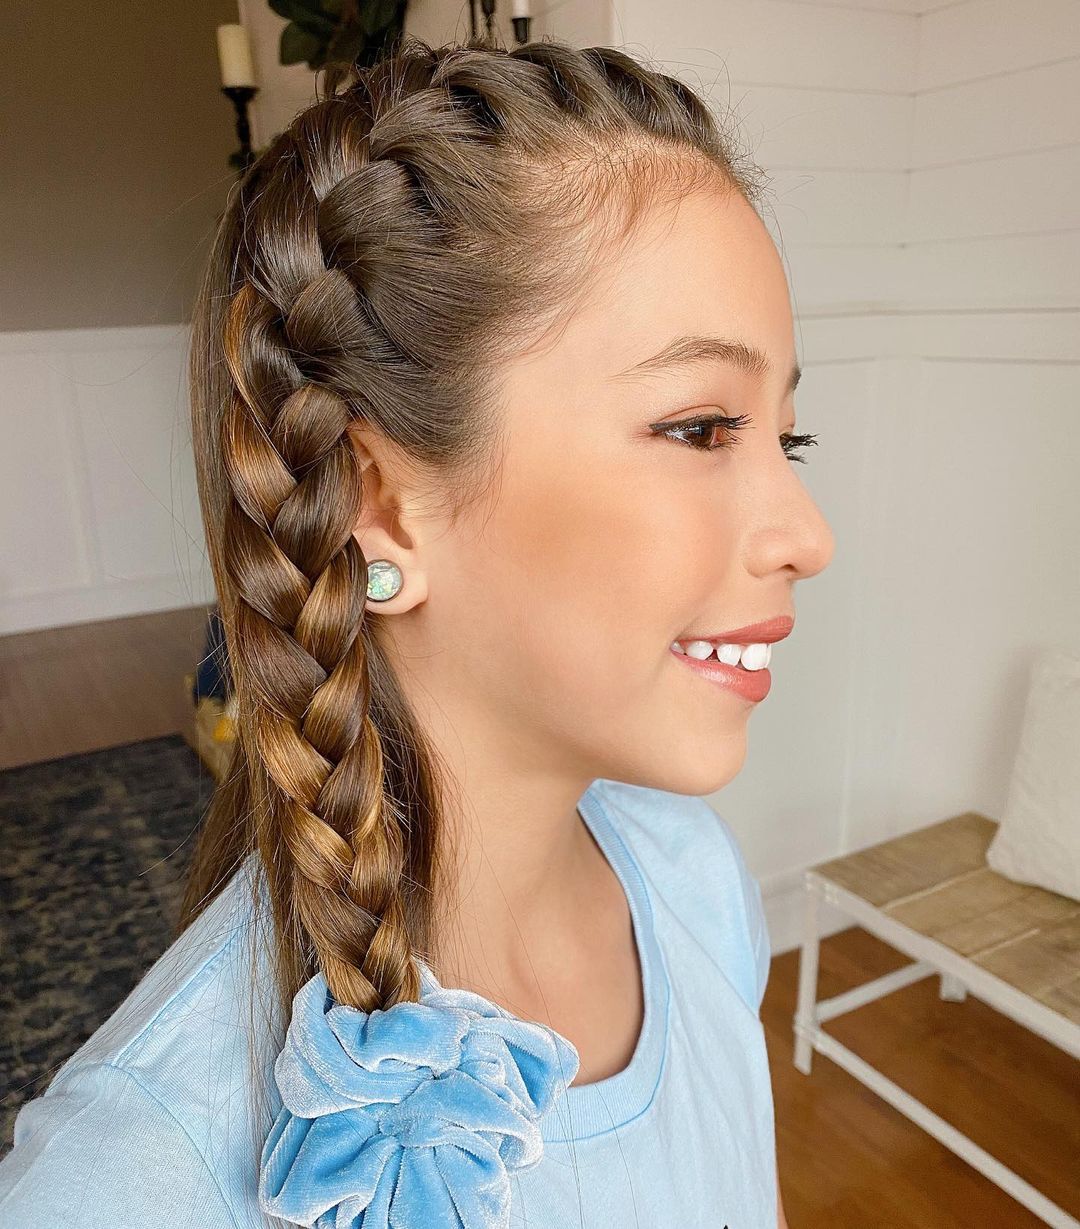  One-Sided Neat French Braid Hairstyle to Turn Heads